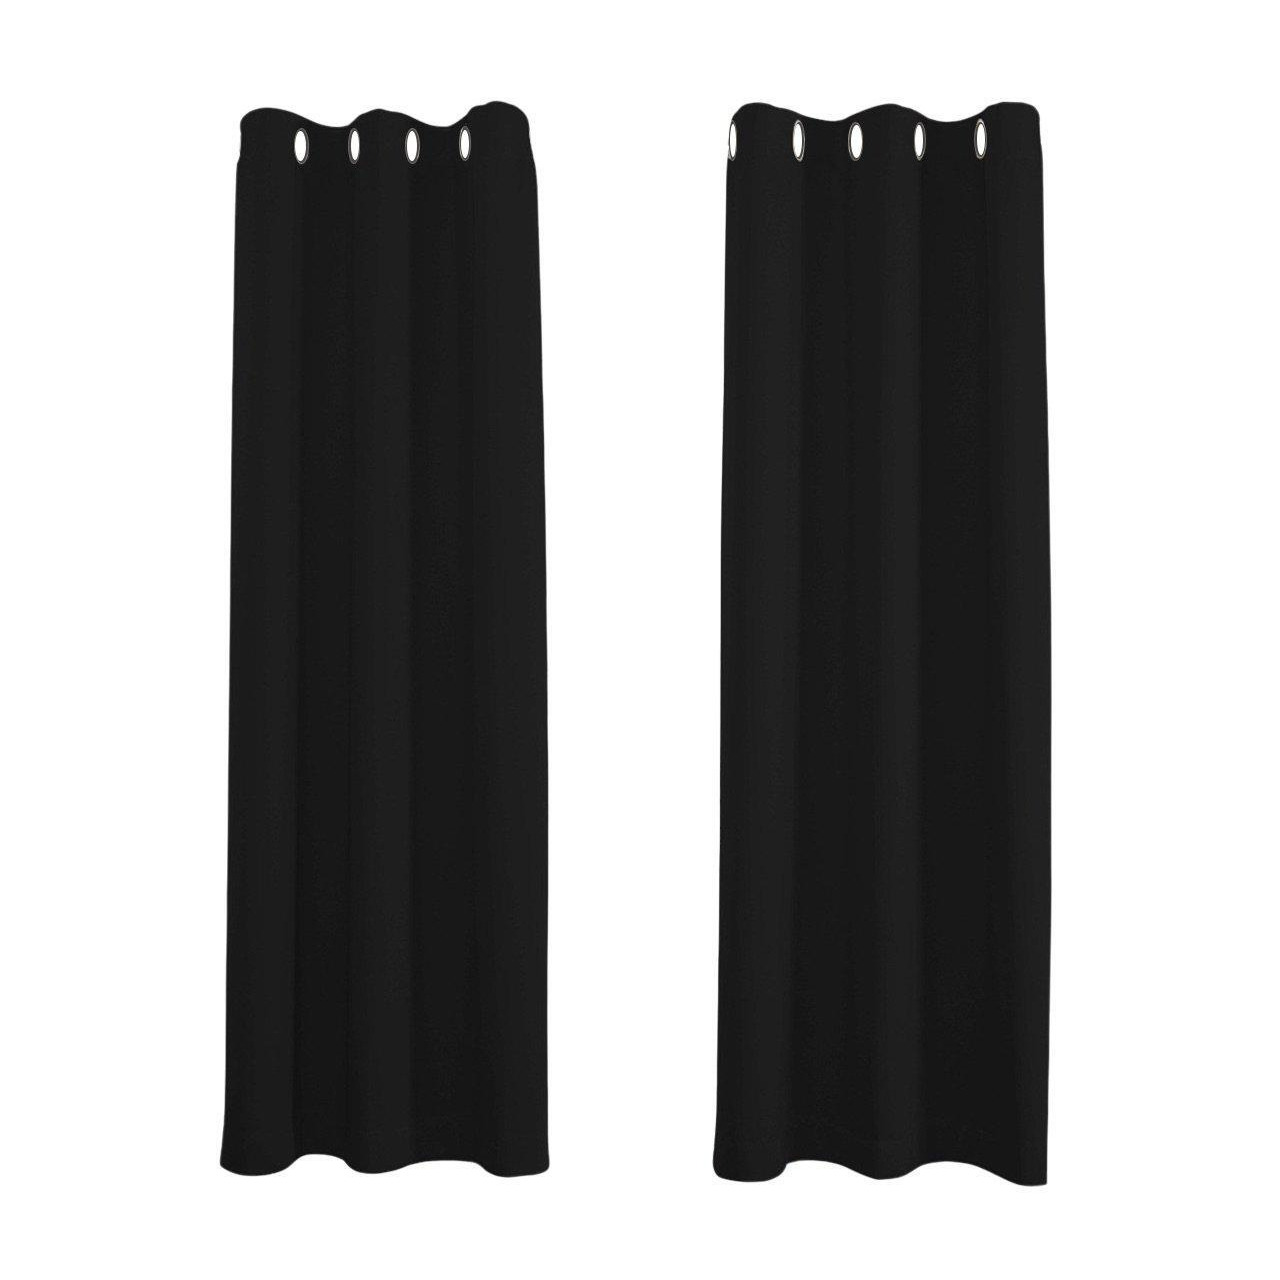 High Quality Polyester Room Darkening Curtains - Eyelet Thermal Curtain 2 Panel Pair - image 1